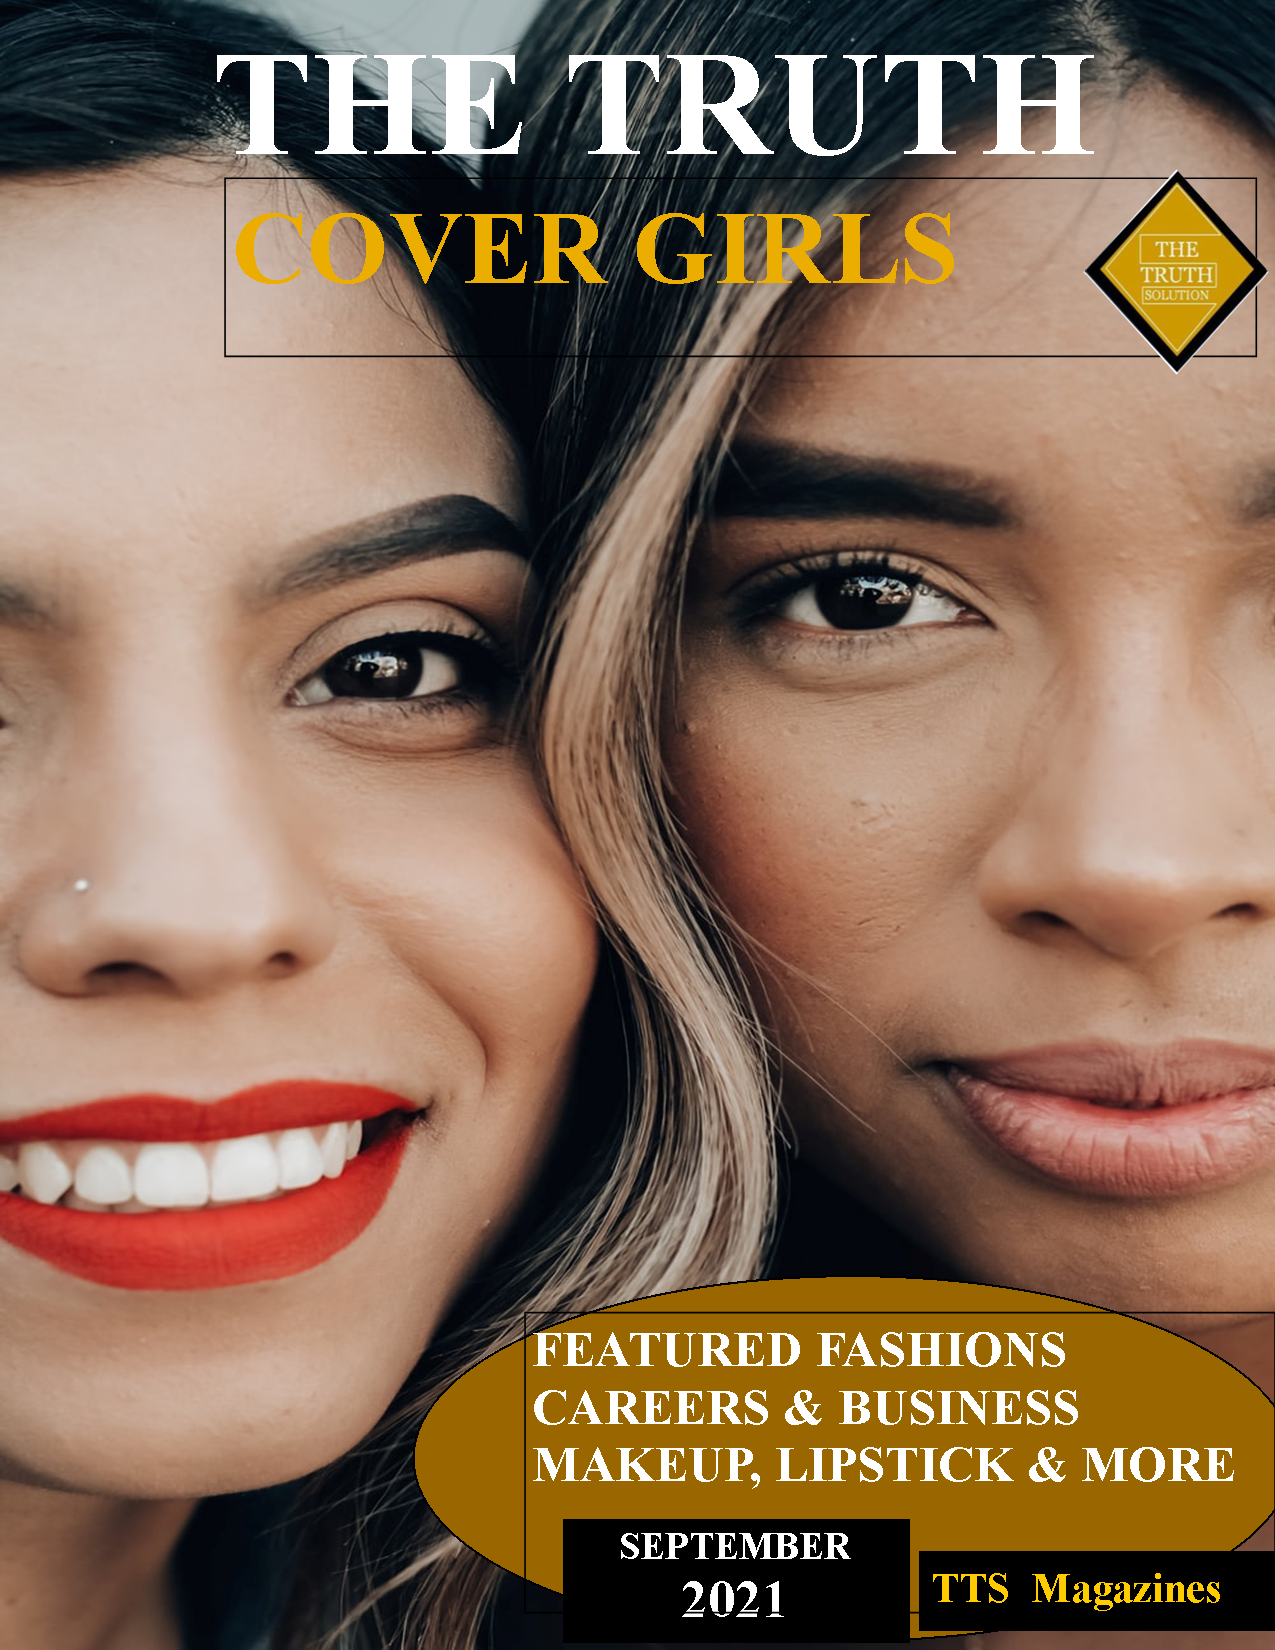 The Truth Covergirl